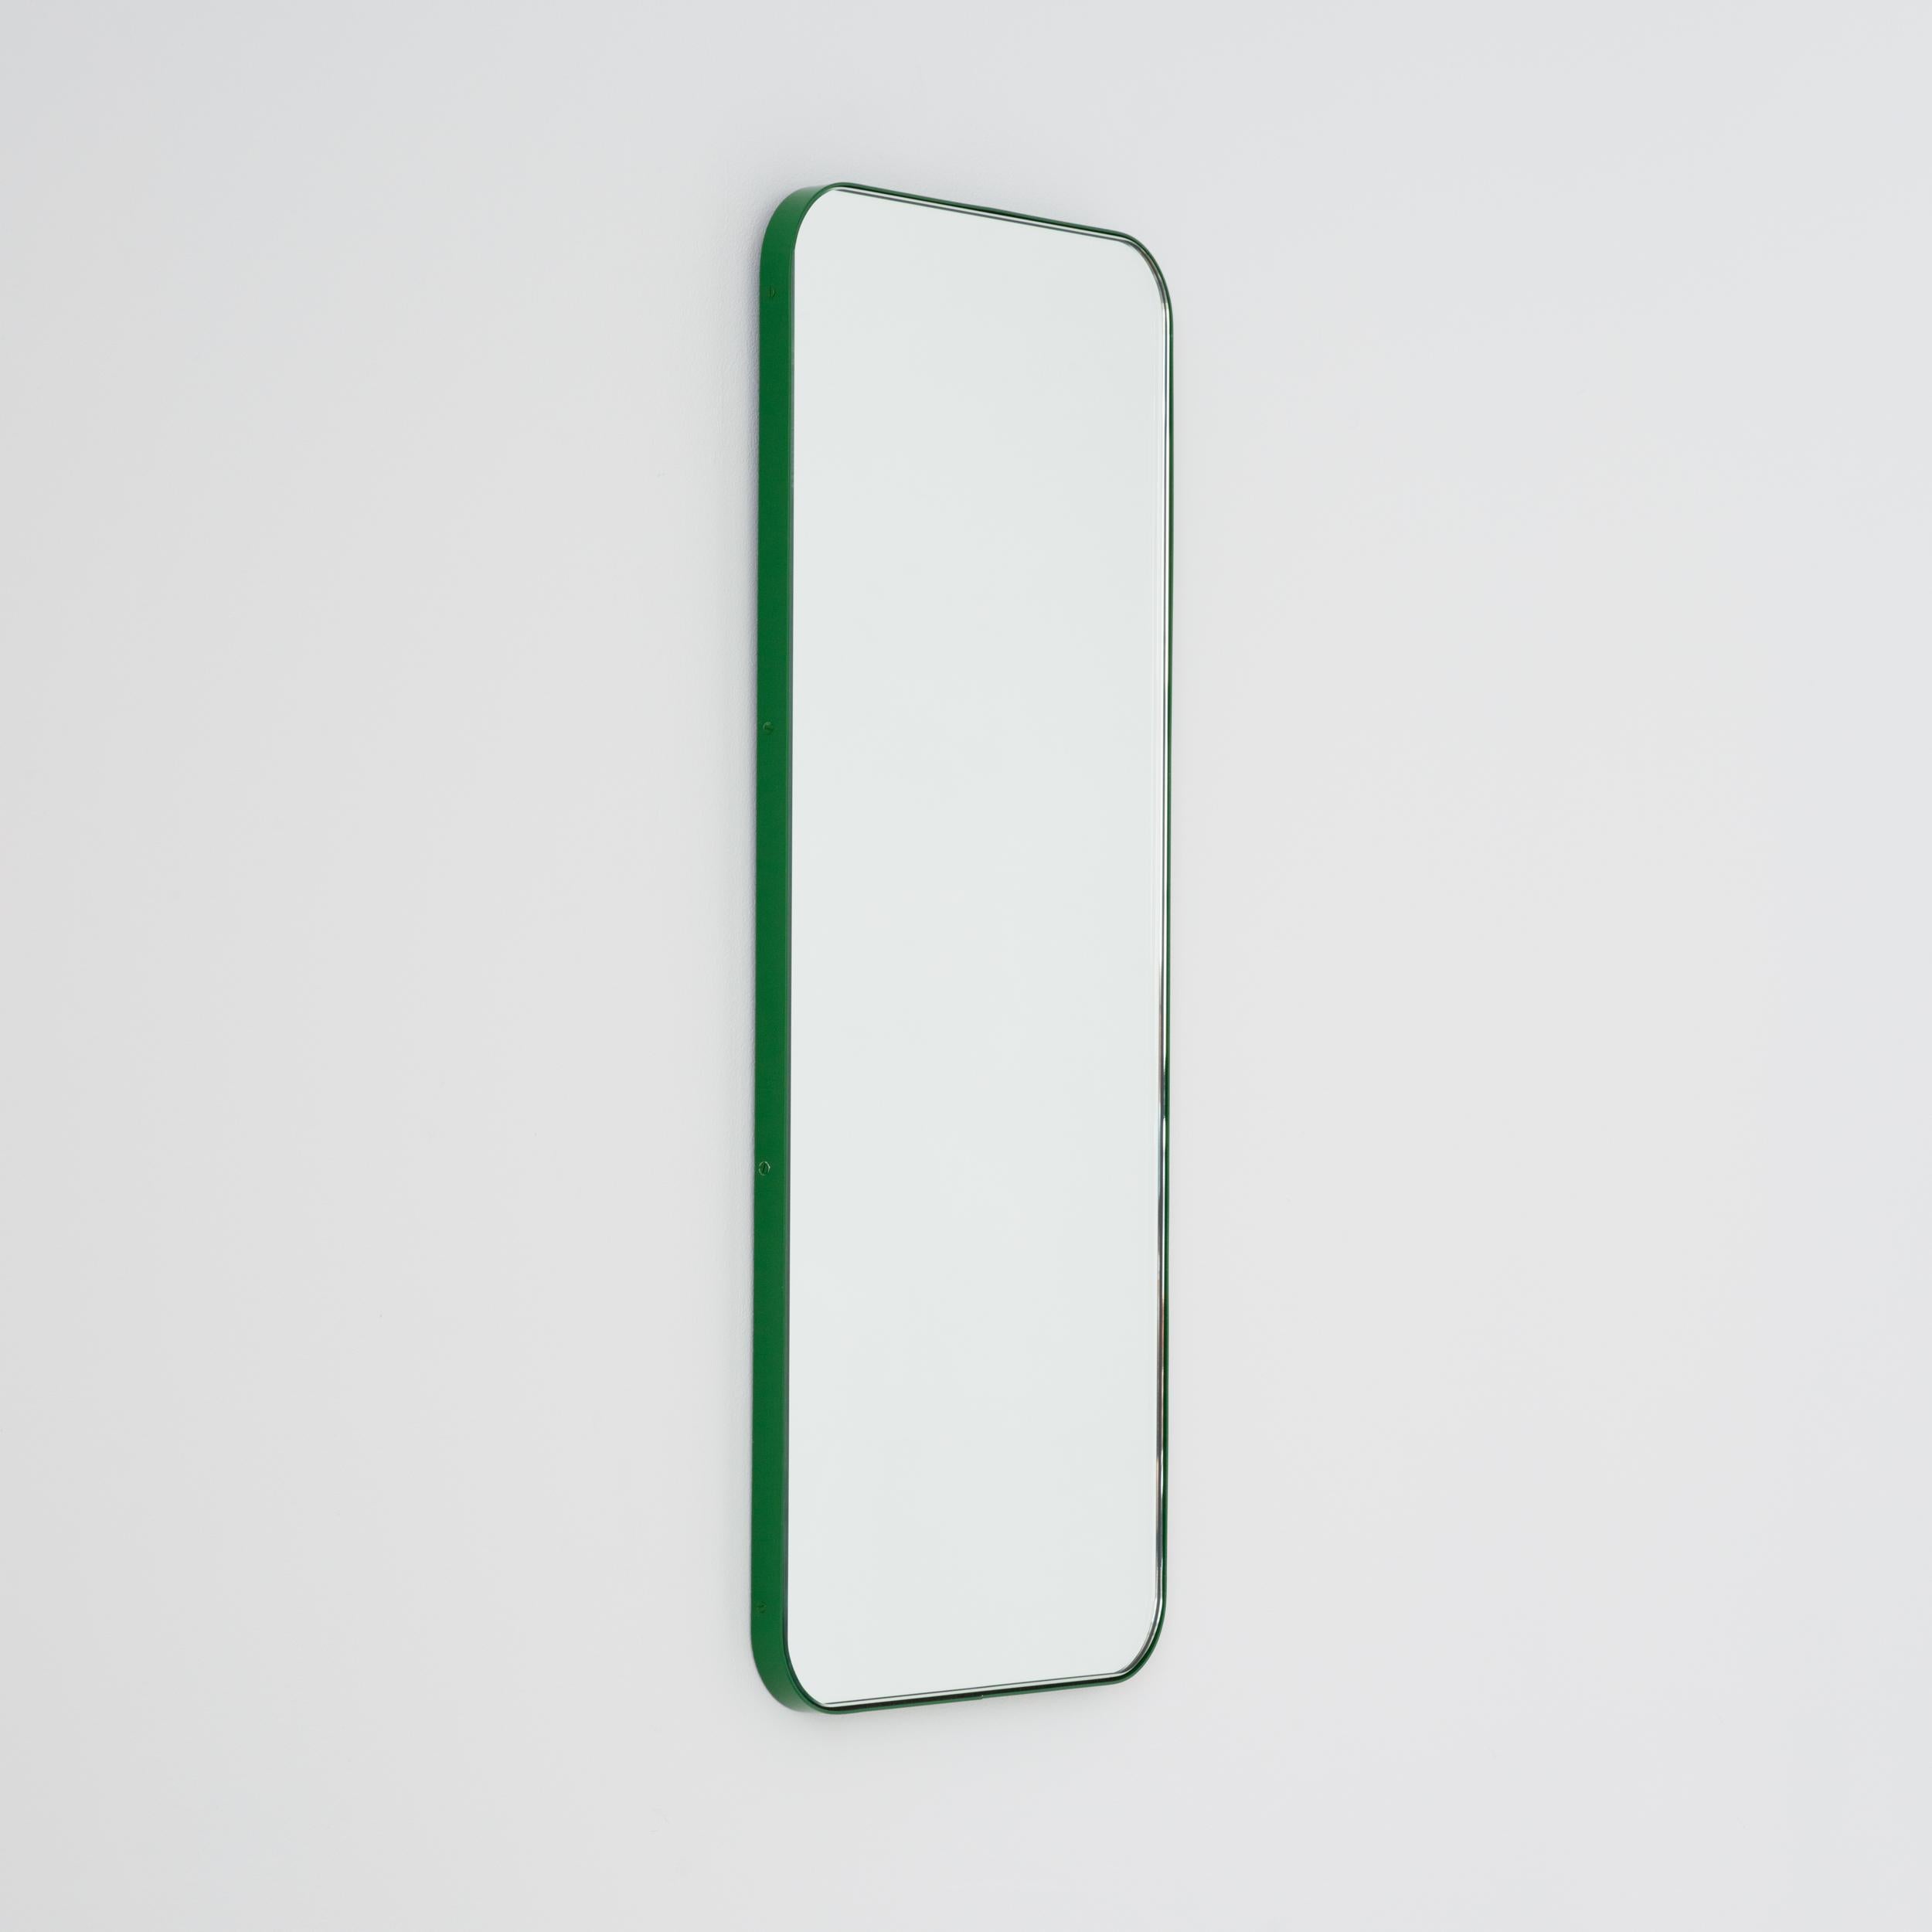 Powder-Coated Quadris Rectangular Modern Mirror with a Green Frame, Small For Sale